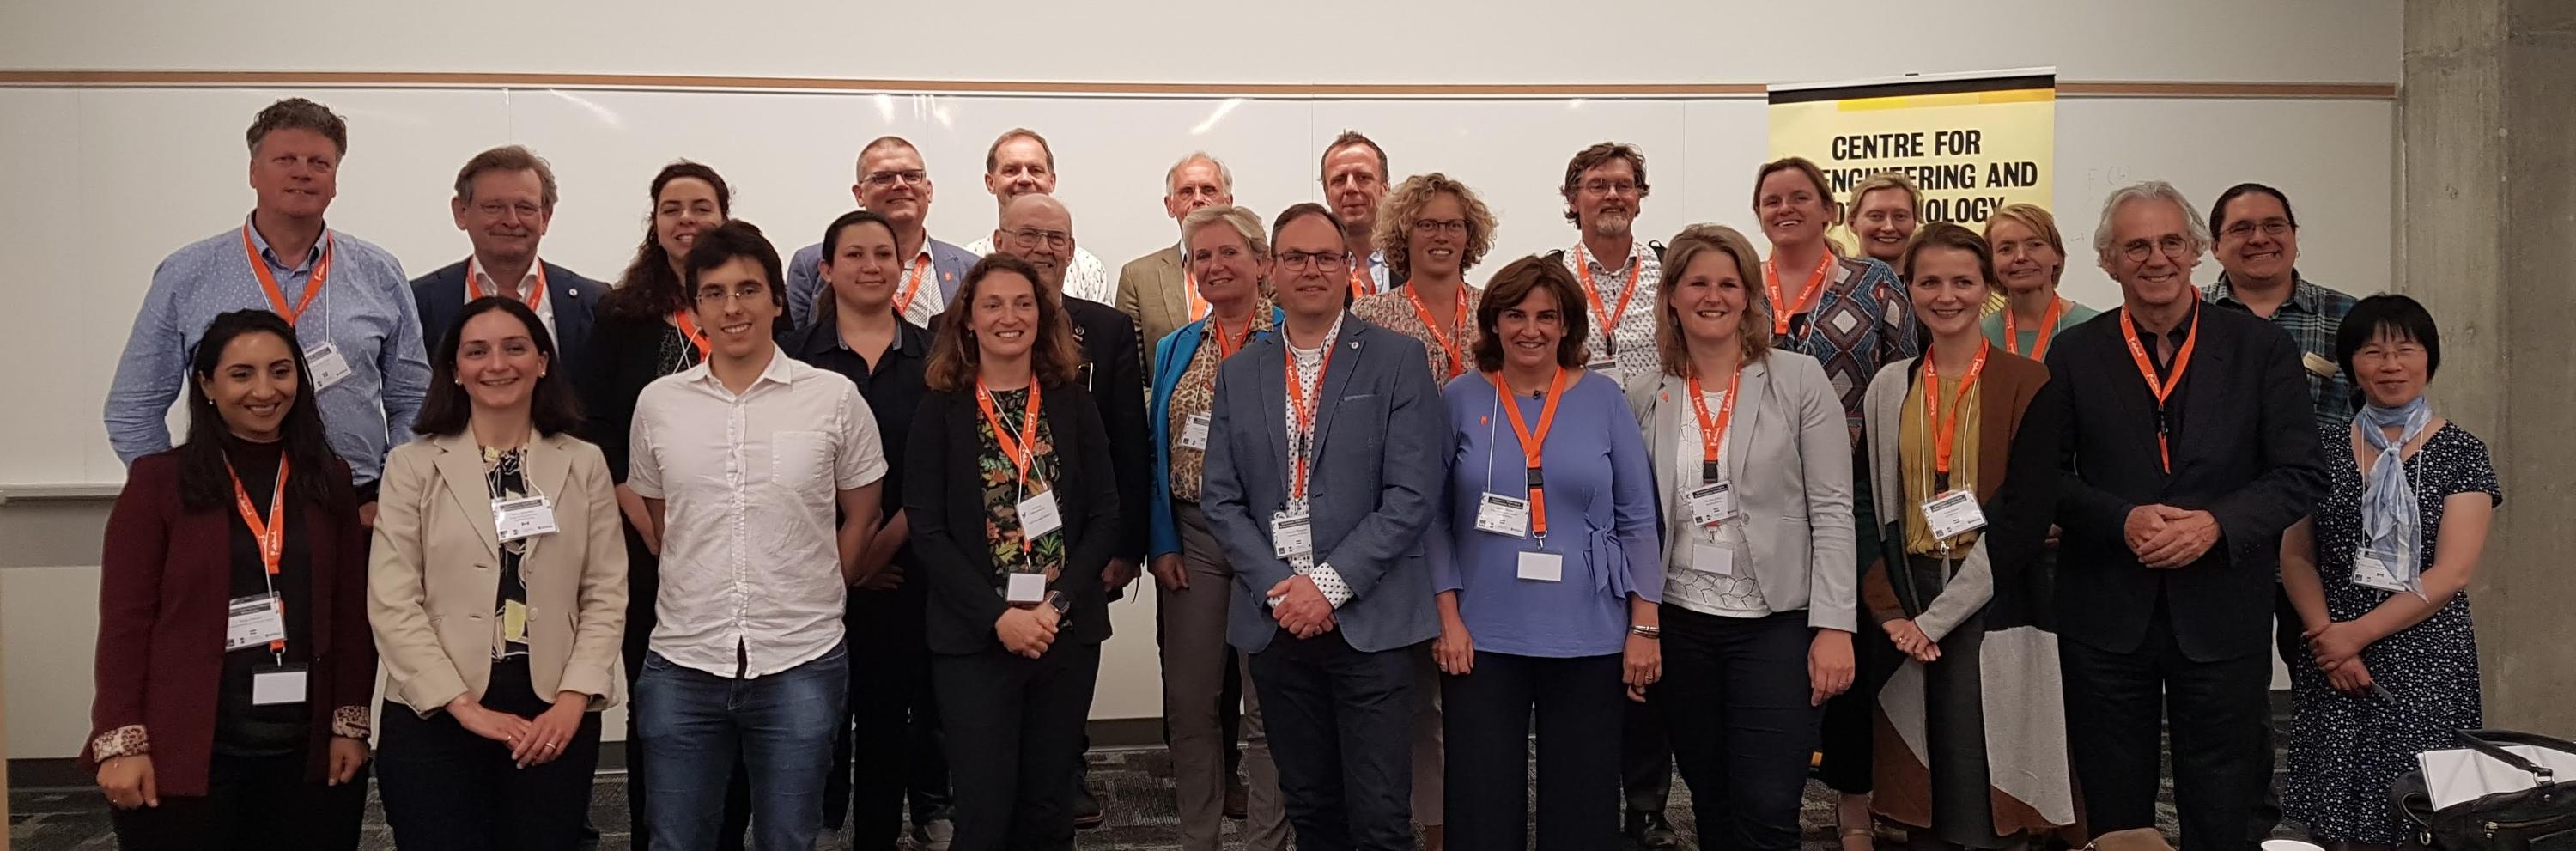 Group photo of visitors from the Netherlands and UW symposium speakers